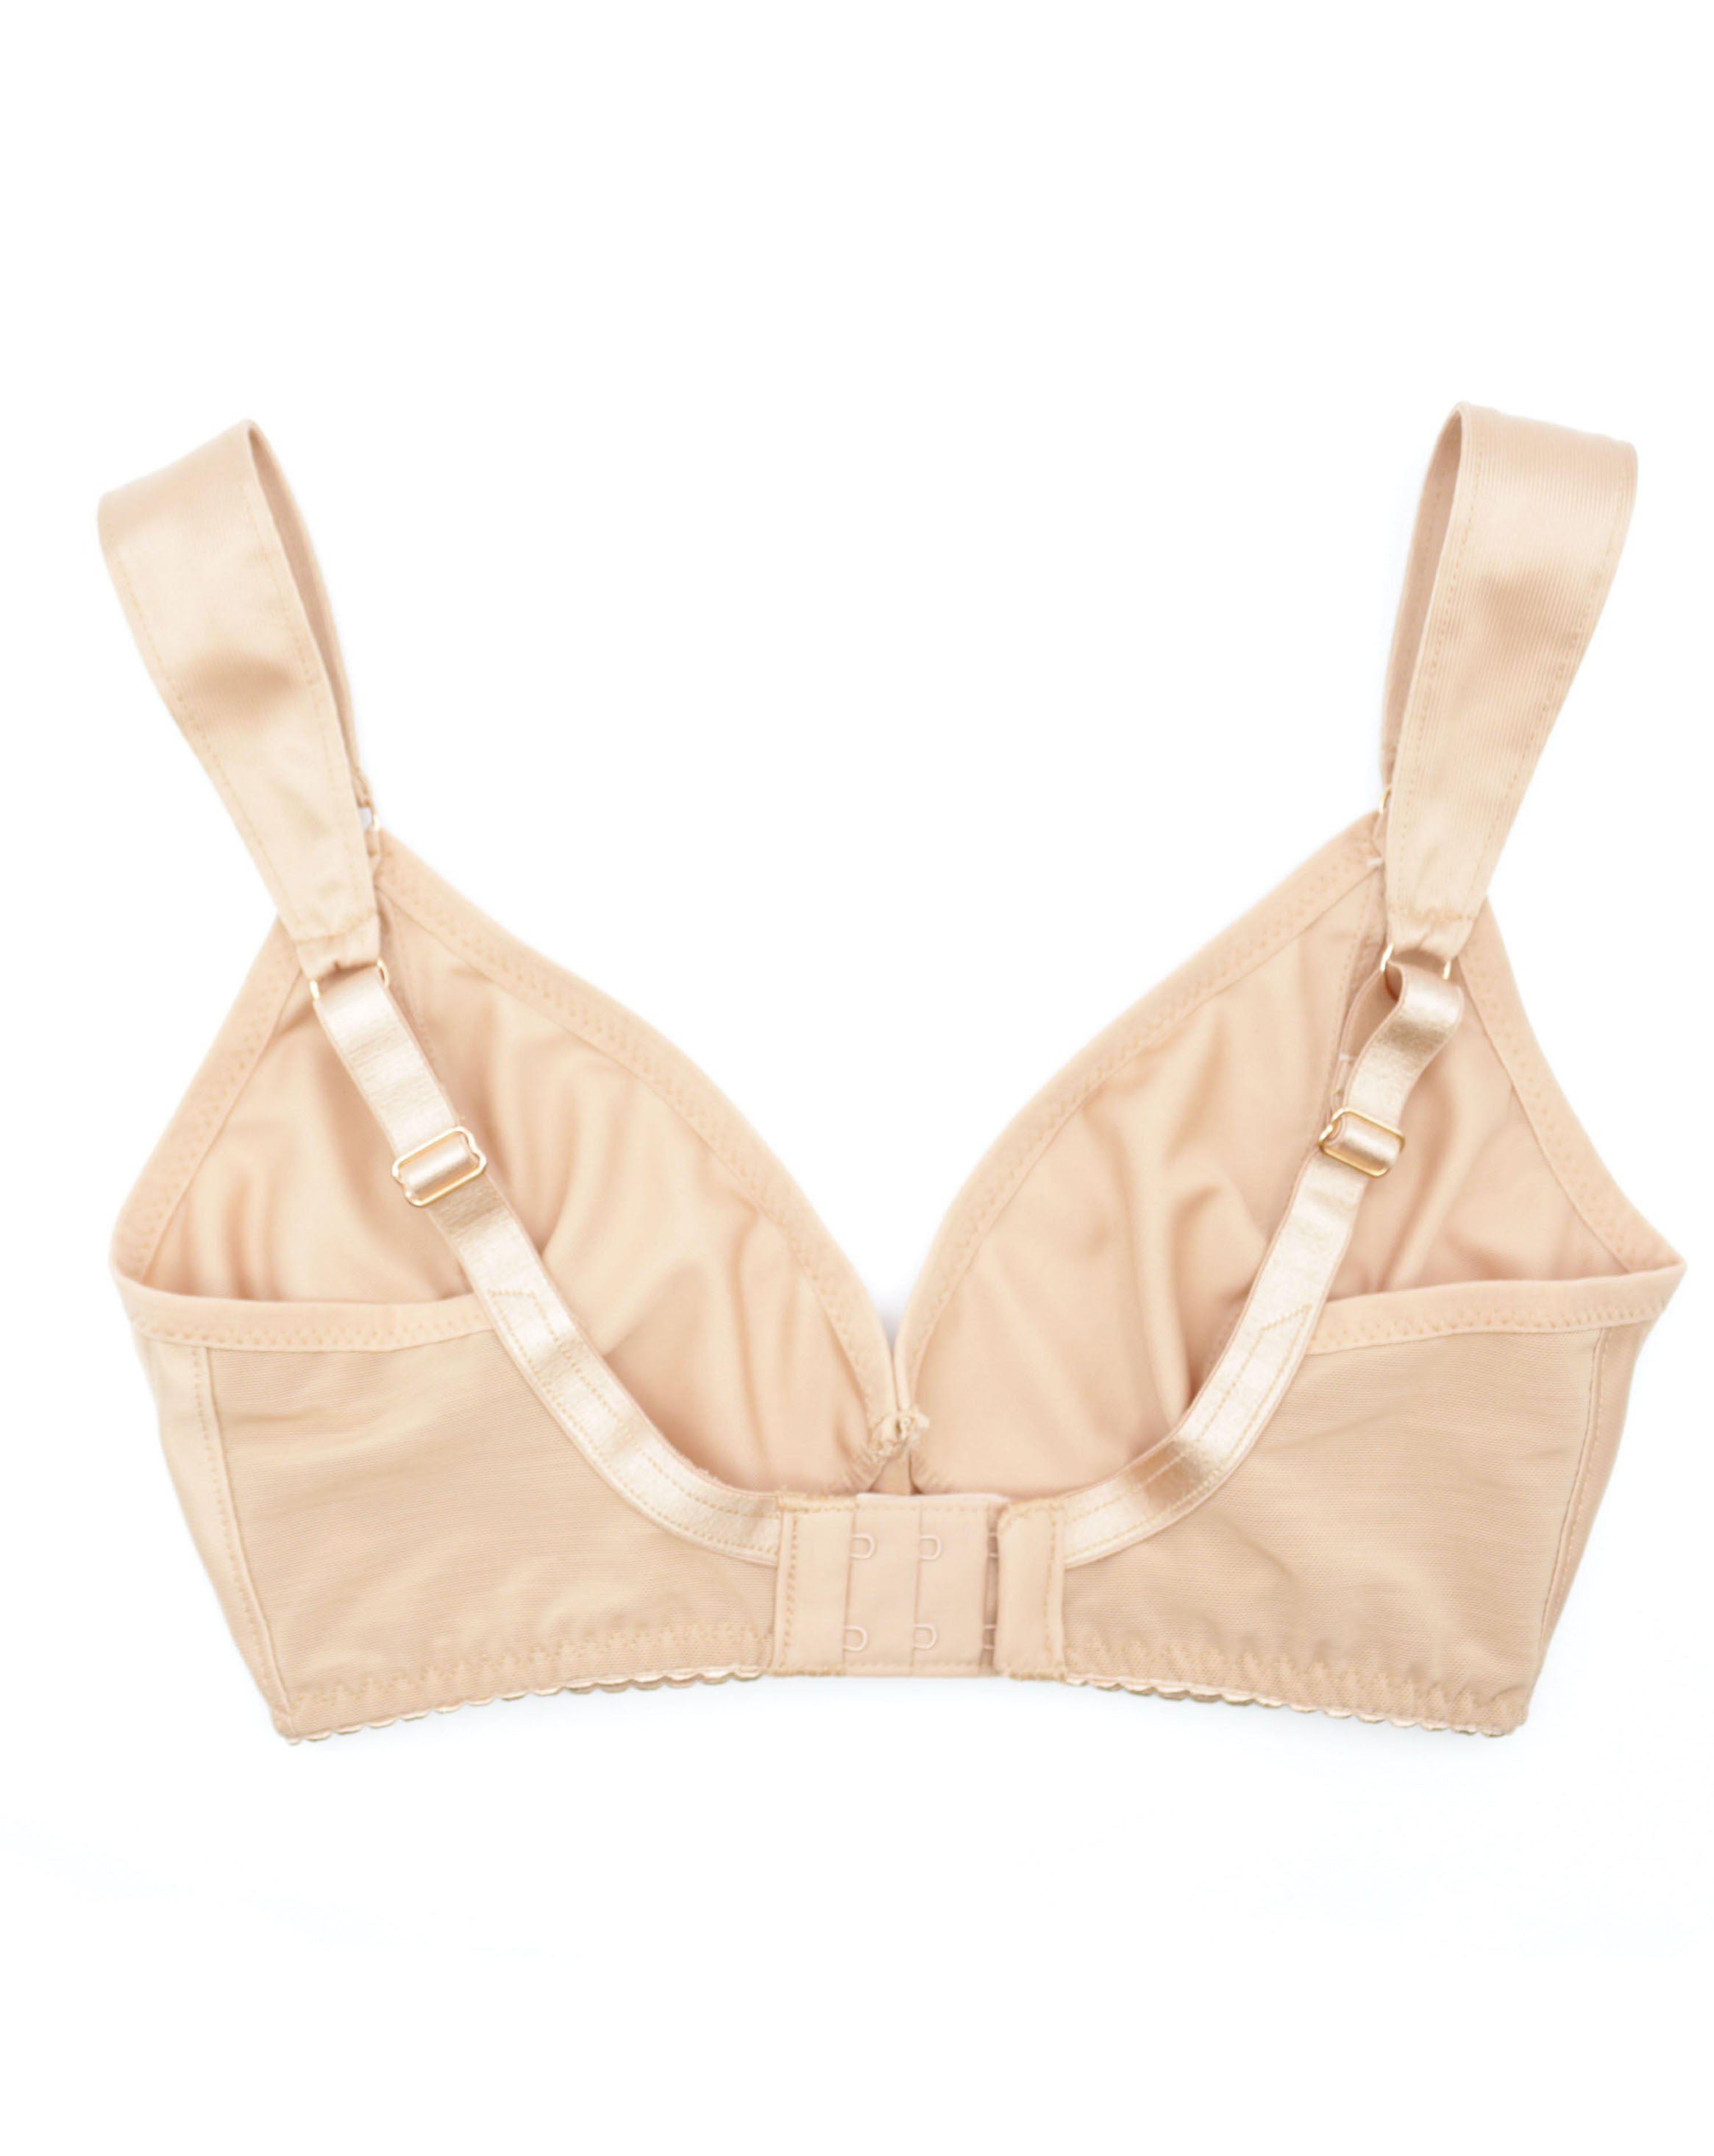 Solid satin bralette. Made in Canada